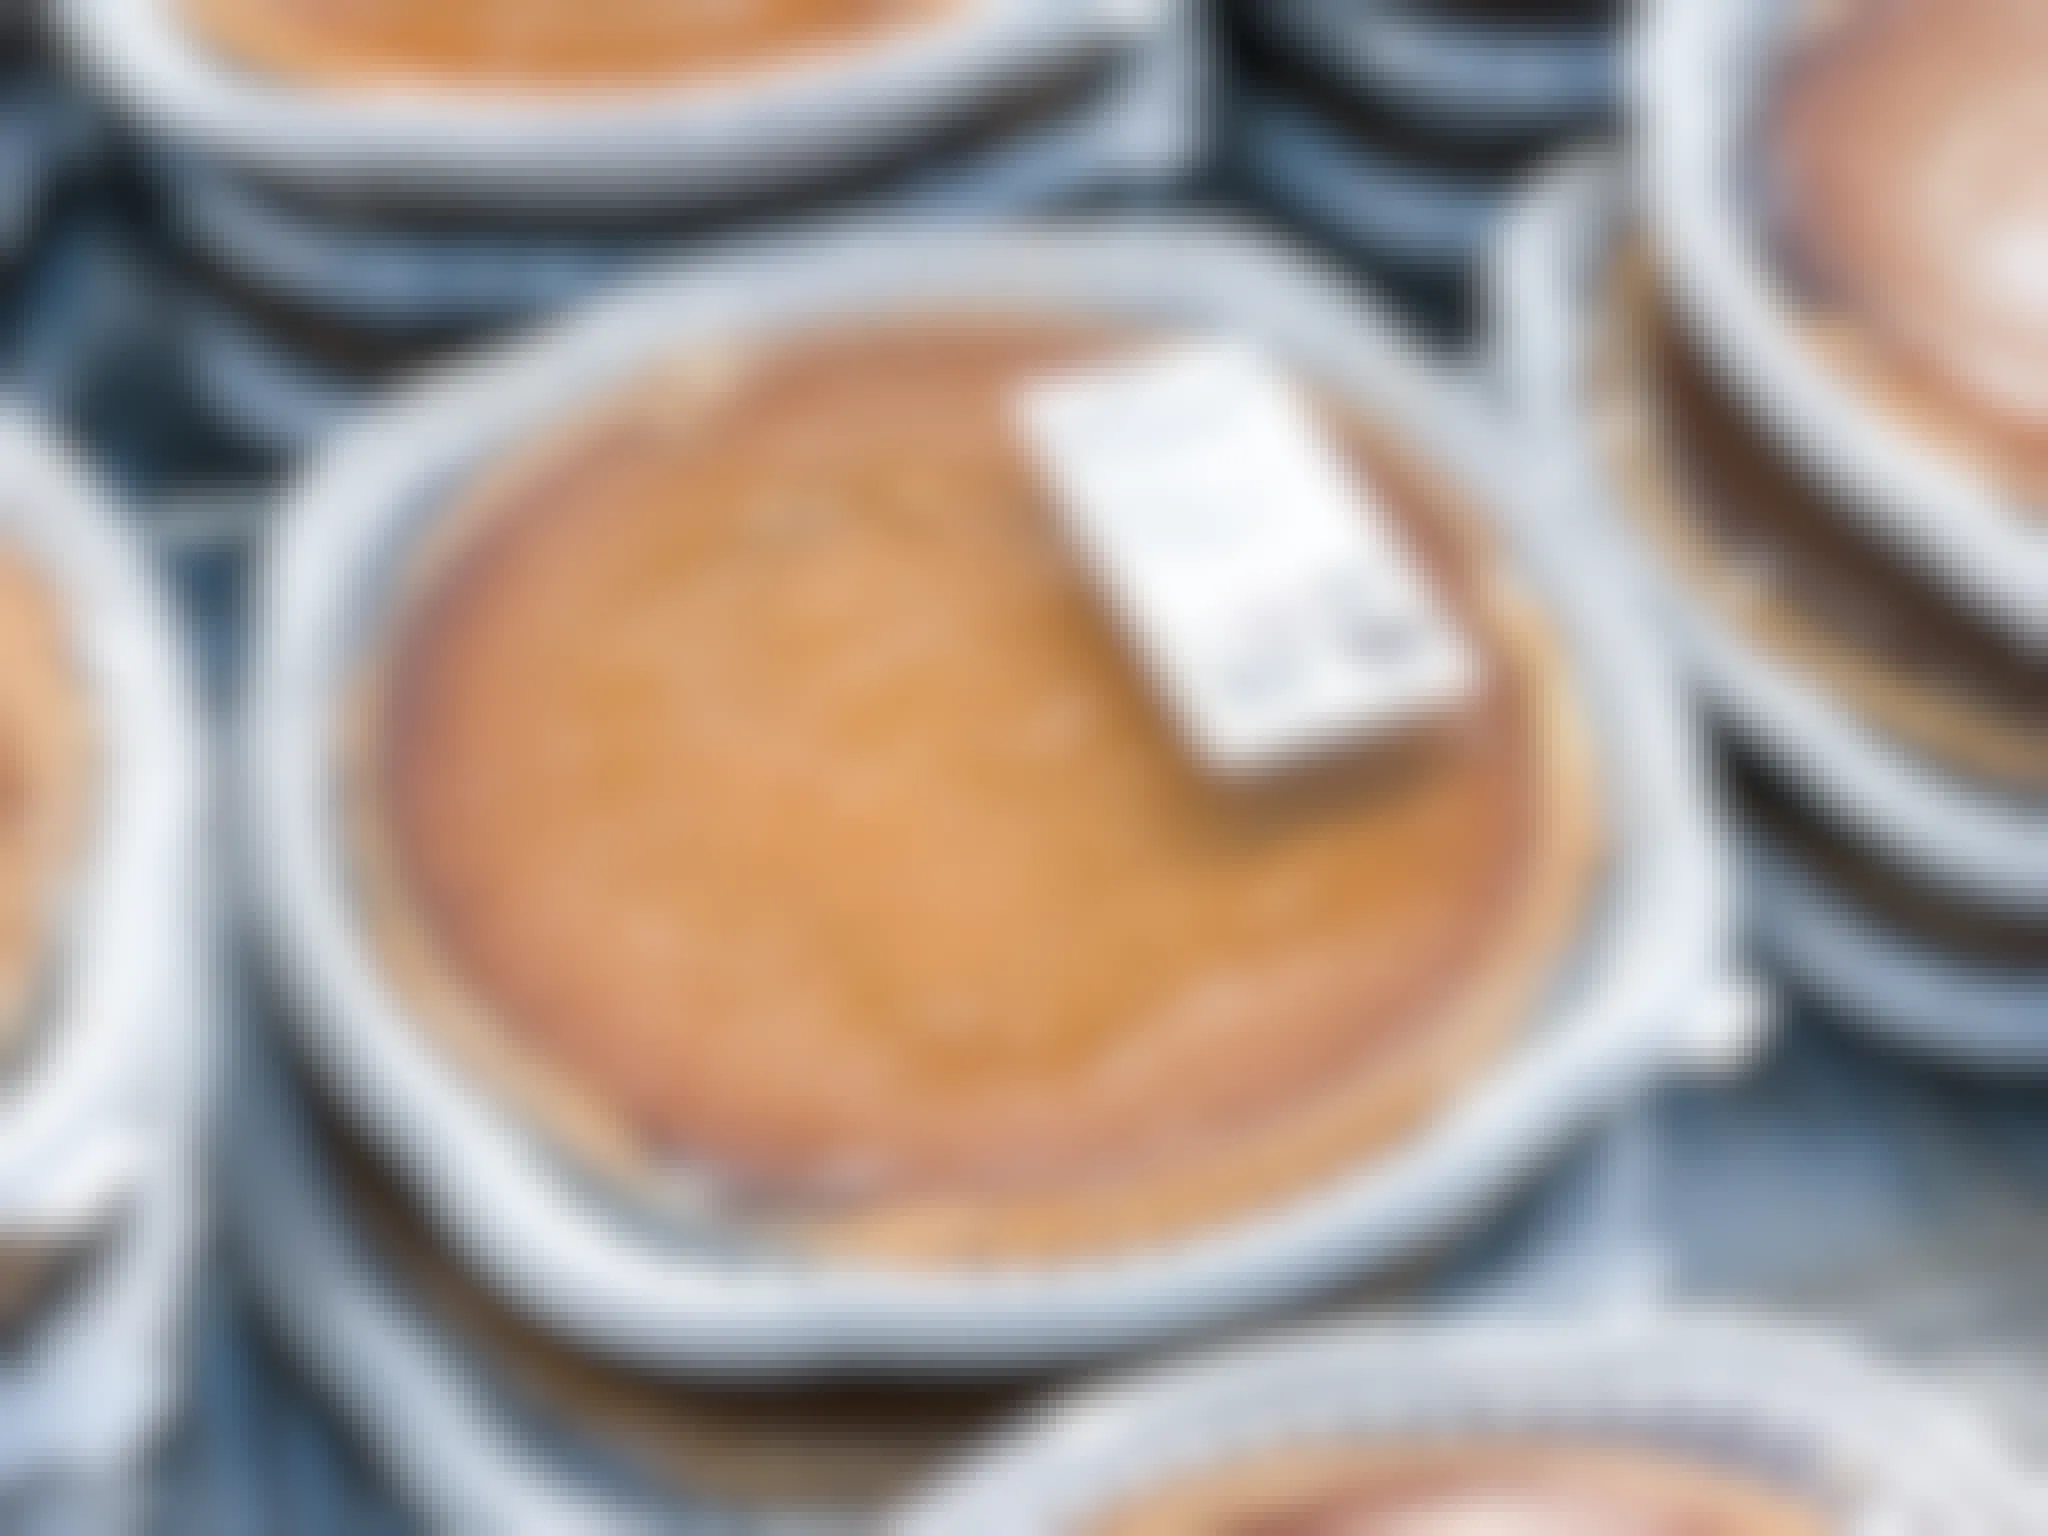 A display of pumpkin pies in the bakery section at Costco.